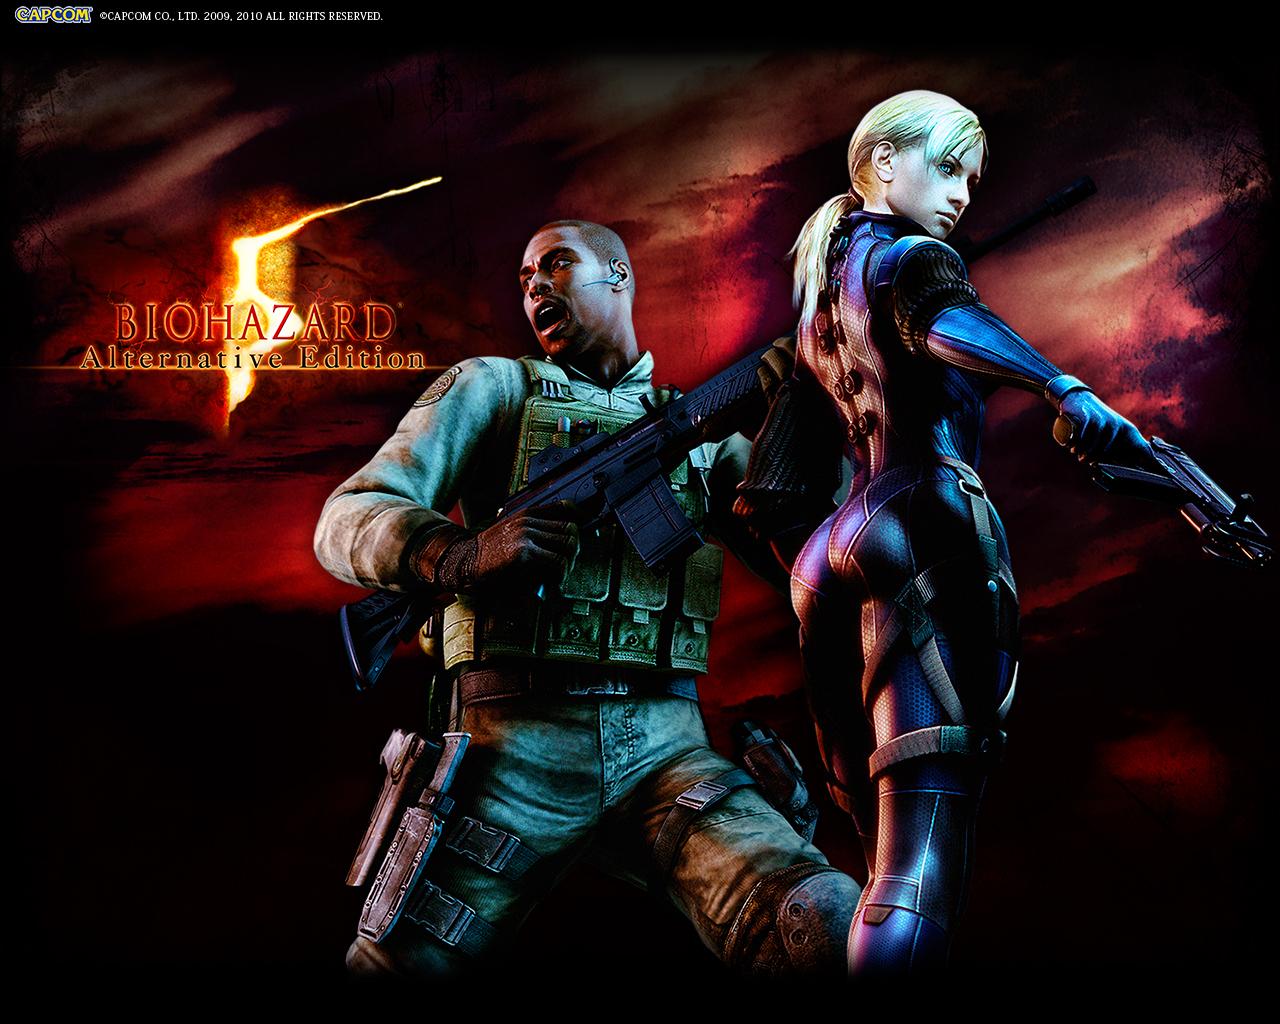 Resident Evil 5 free Wallpapers 40 photos for your desktop